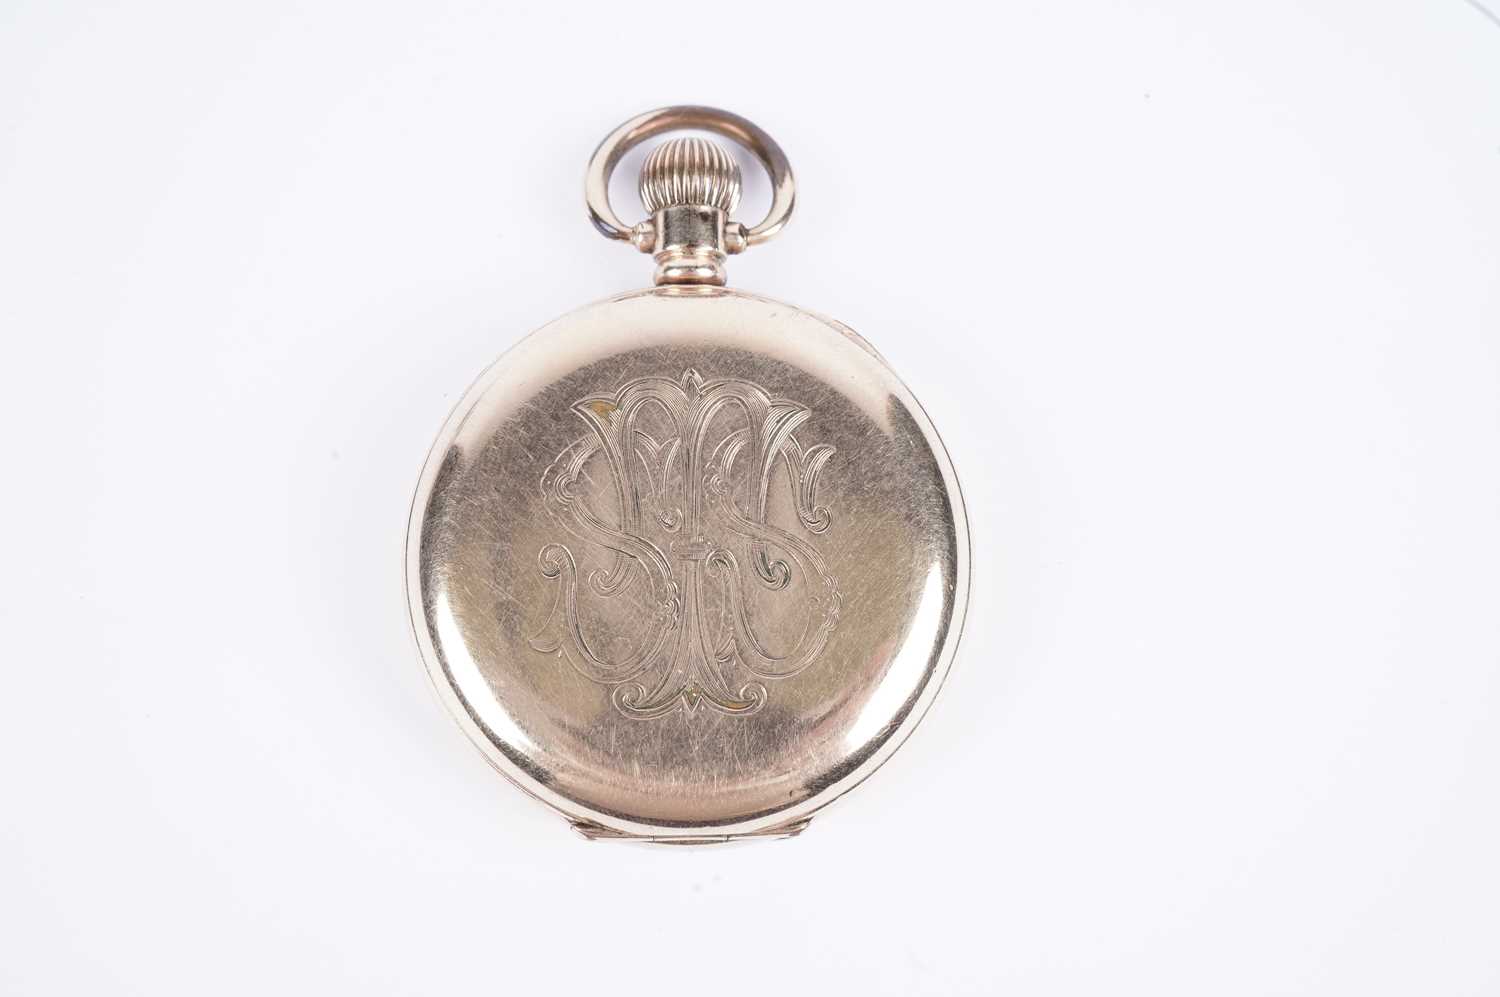 An antique gold-plated Zenith hunter pocket watch retailed by Reid & Sons - Image 5 of 6